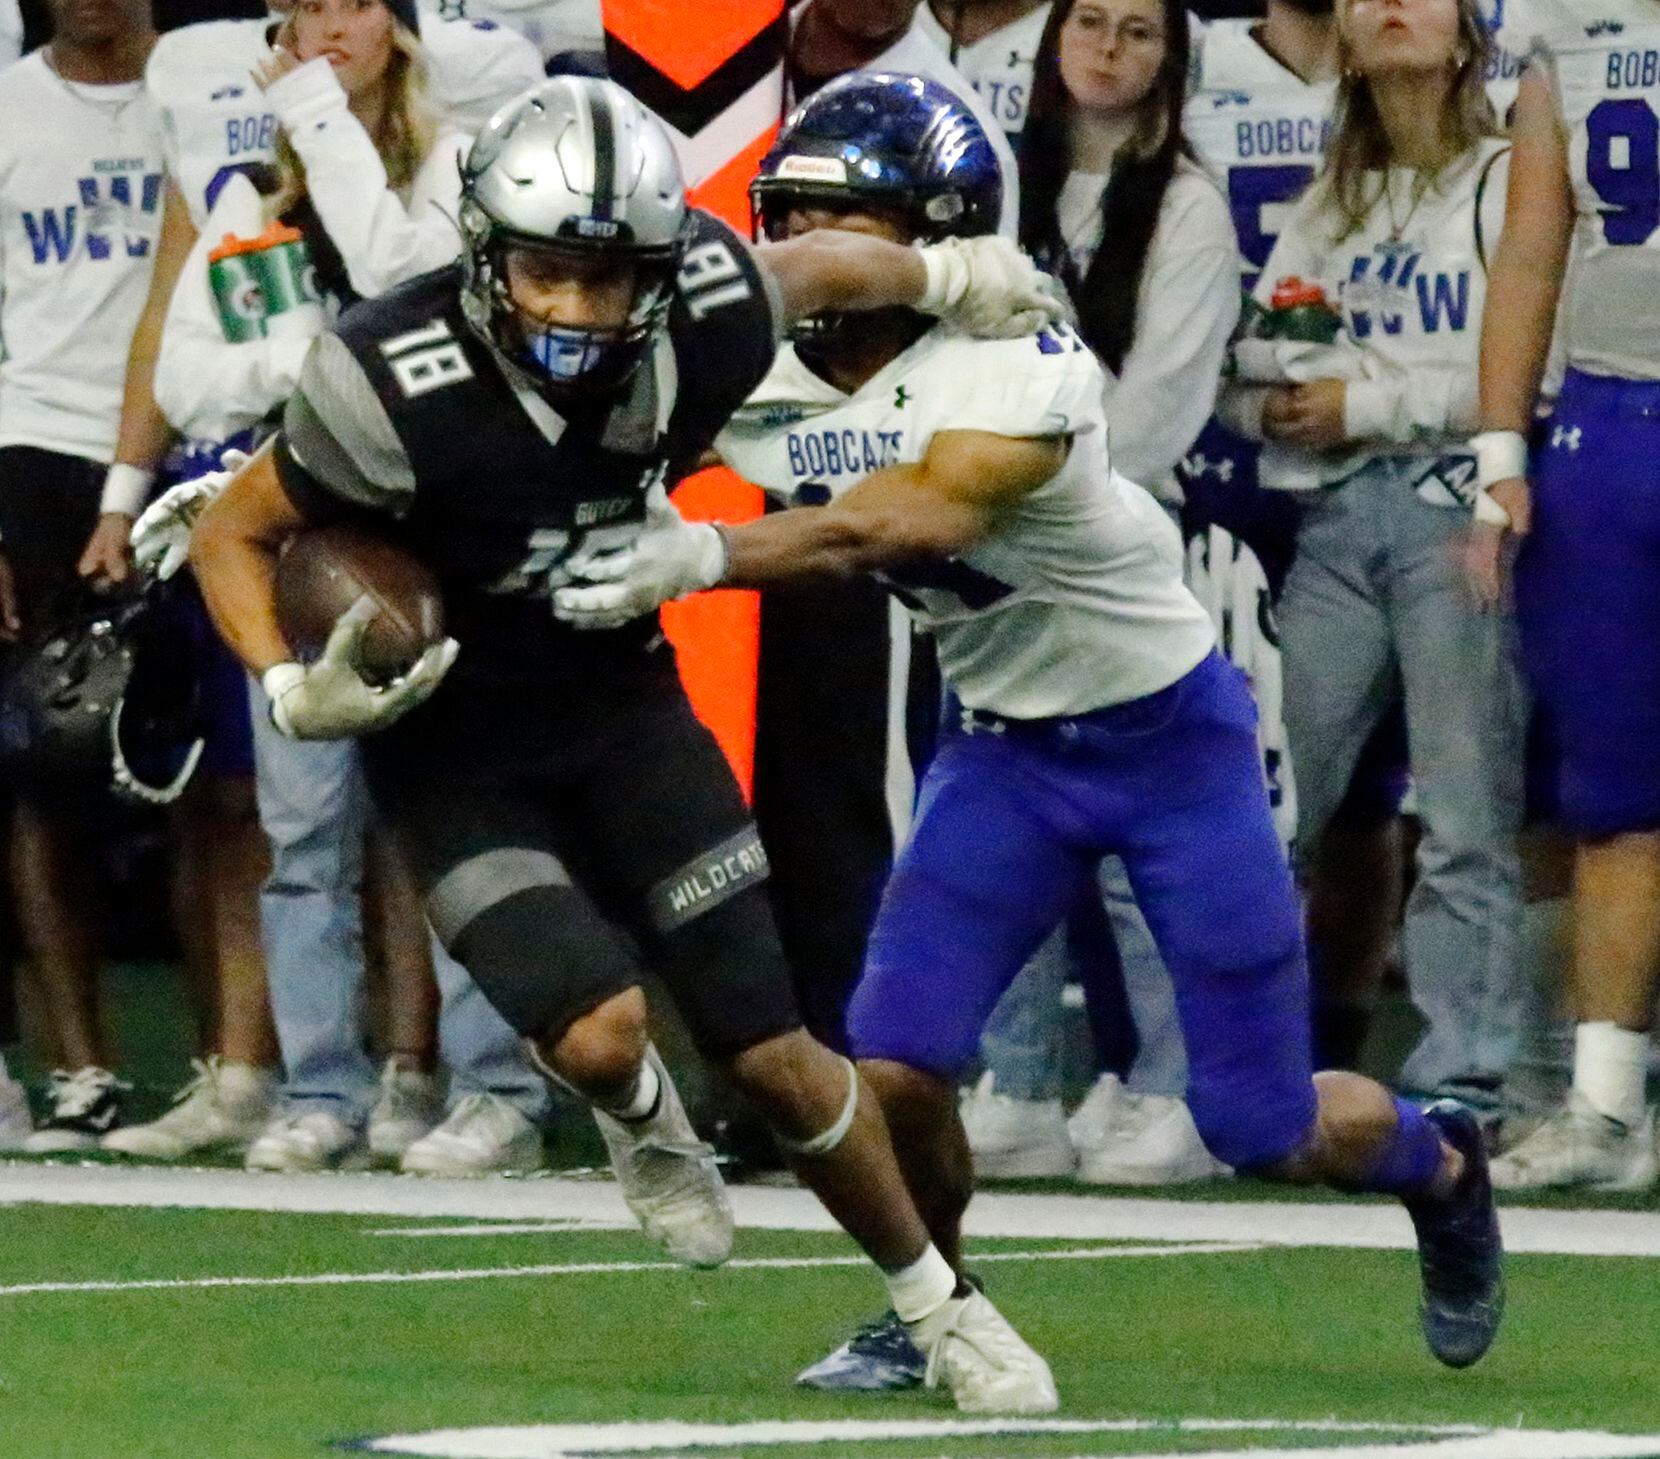 Guyer High School cornerback Eli Bowen (18) tries to break away from Byron Nelson High School wide receiver Landon Ransom (14) after Bowen made an interception during the first half as Denton Guyer High School played Trophy Club Byron Nelson High School in a Class 6A Division II Region I semifinal football game at The Ford Center in Frisco on Saturday, November 27, 2021. (Stewart F. House/Special Contributor)